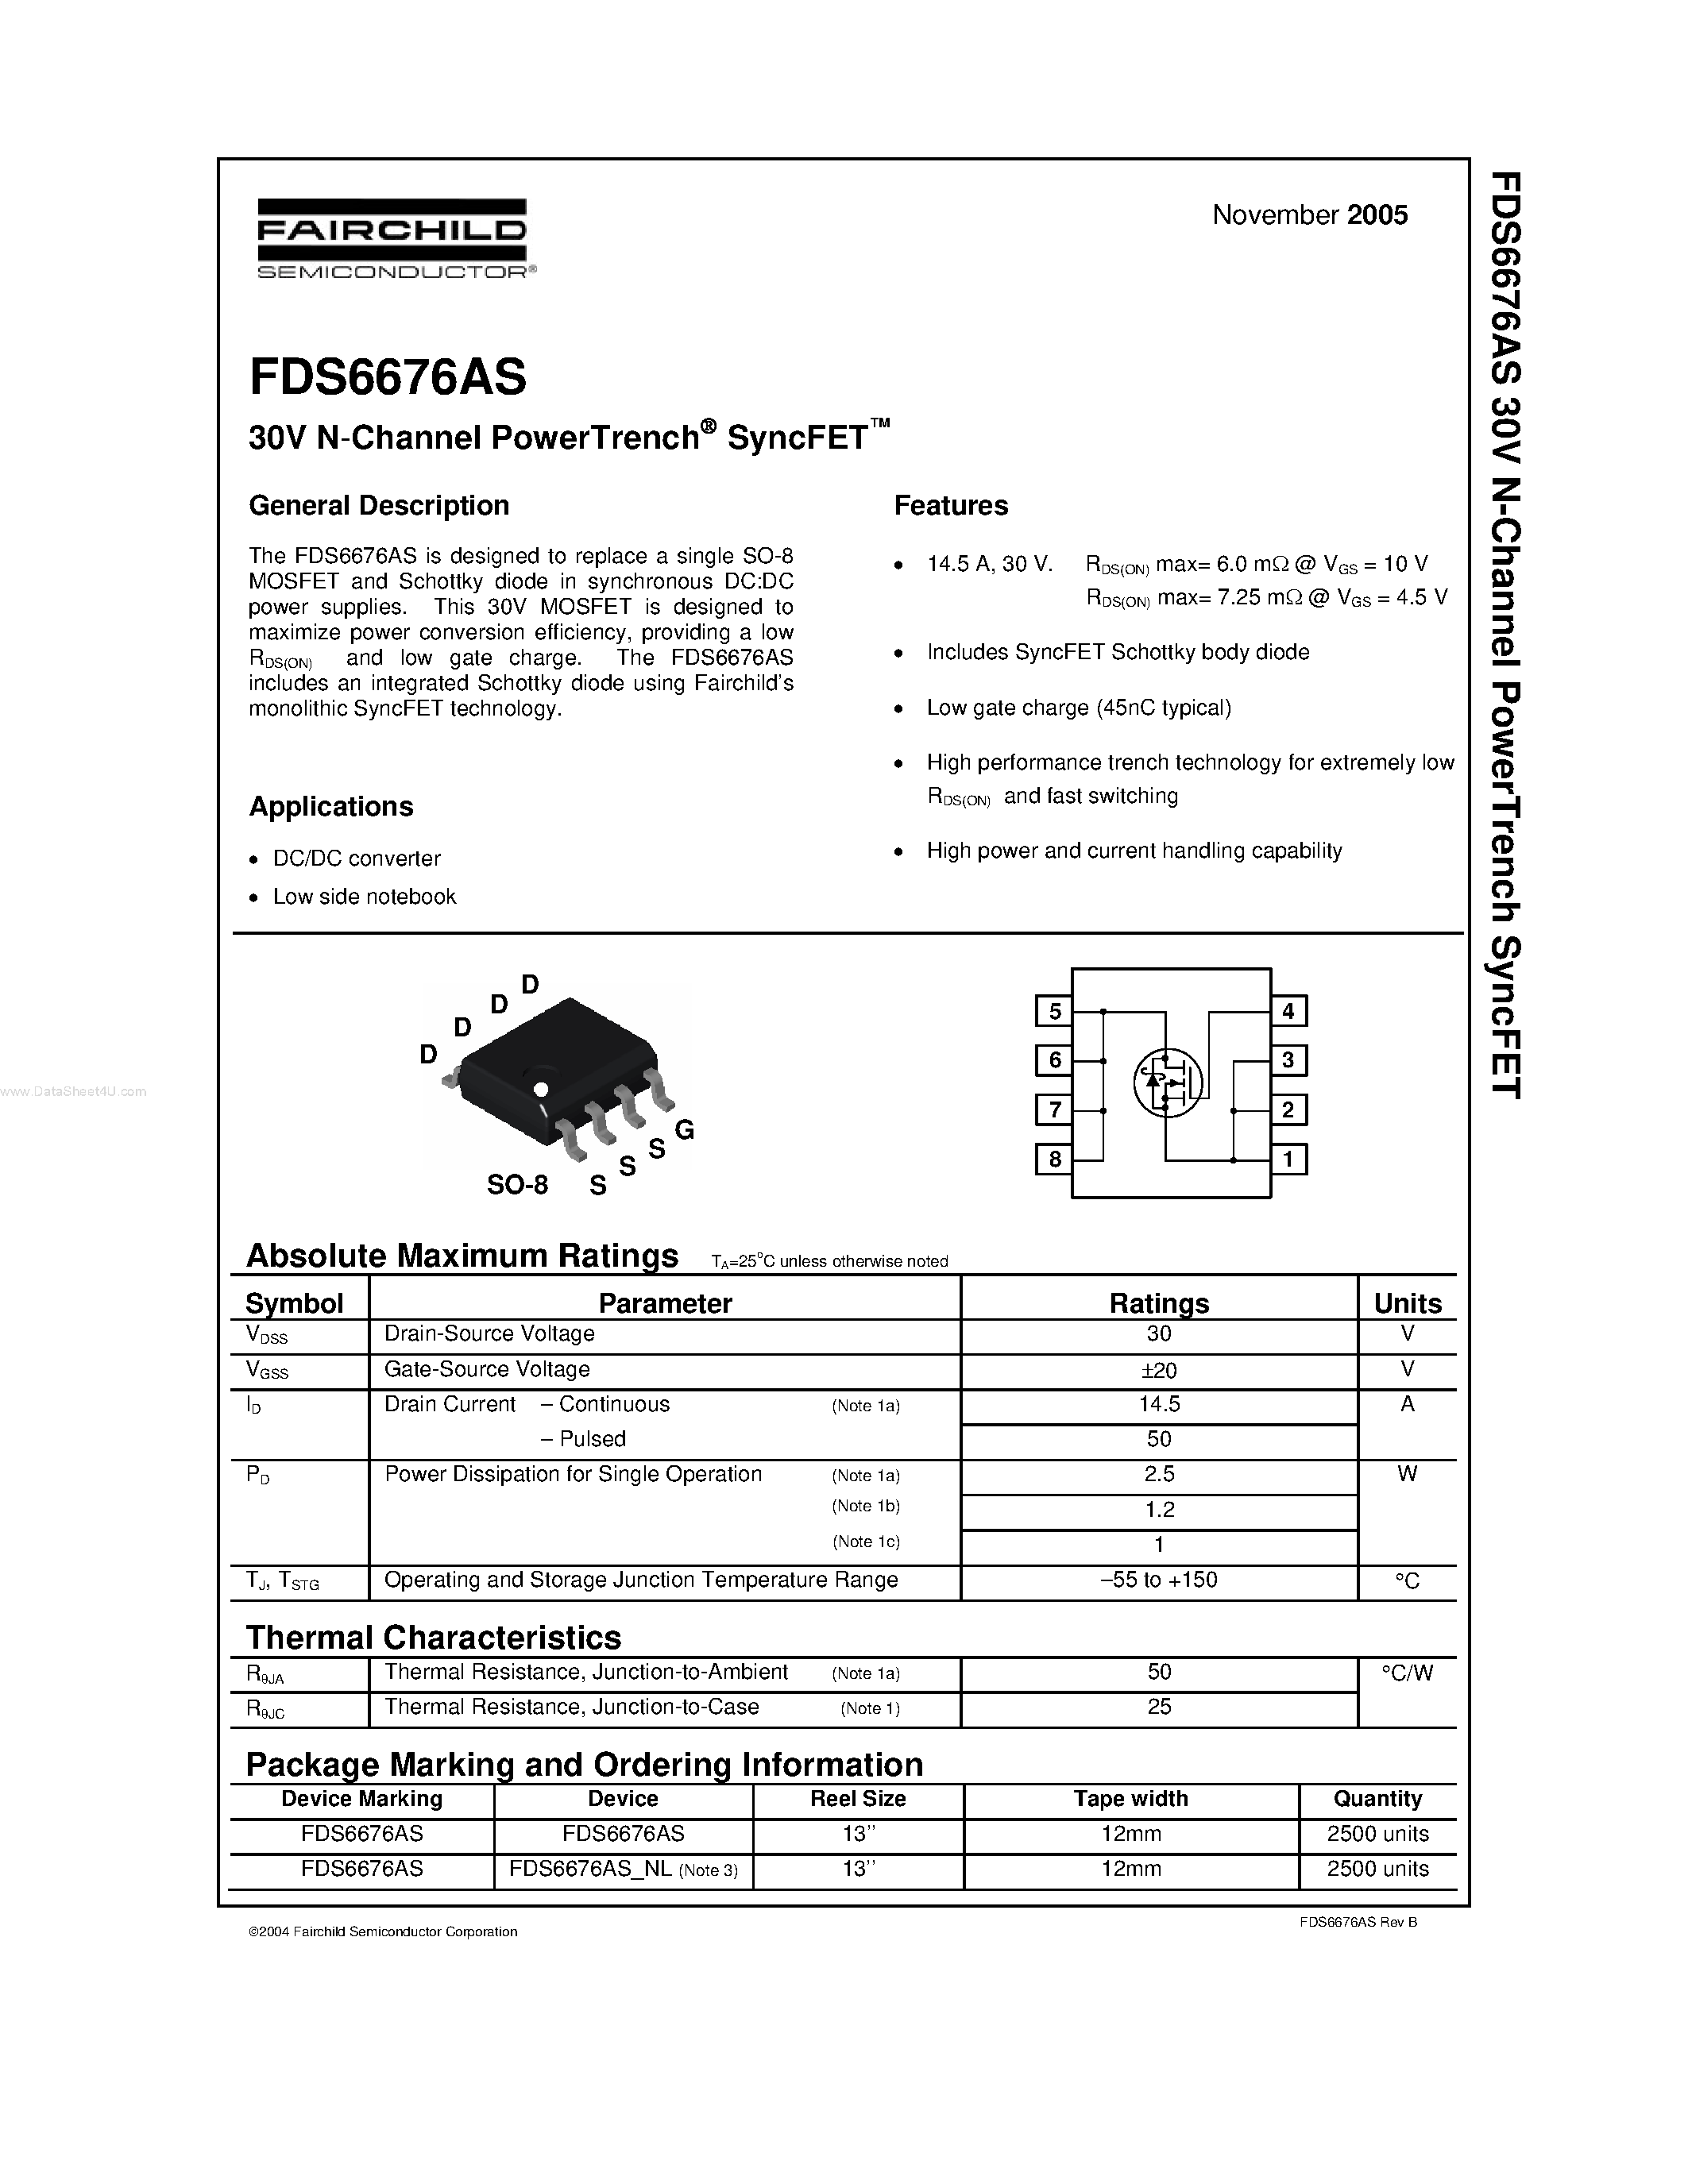 Datasheet FDS6676AS - 30V N-Channel PowerTrench SyncFET page 1